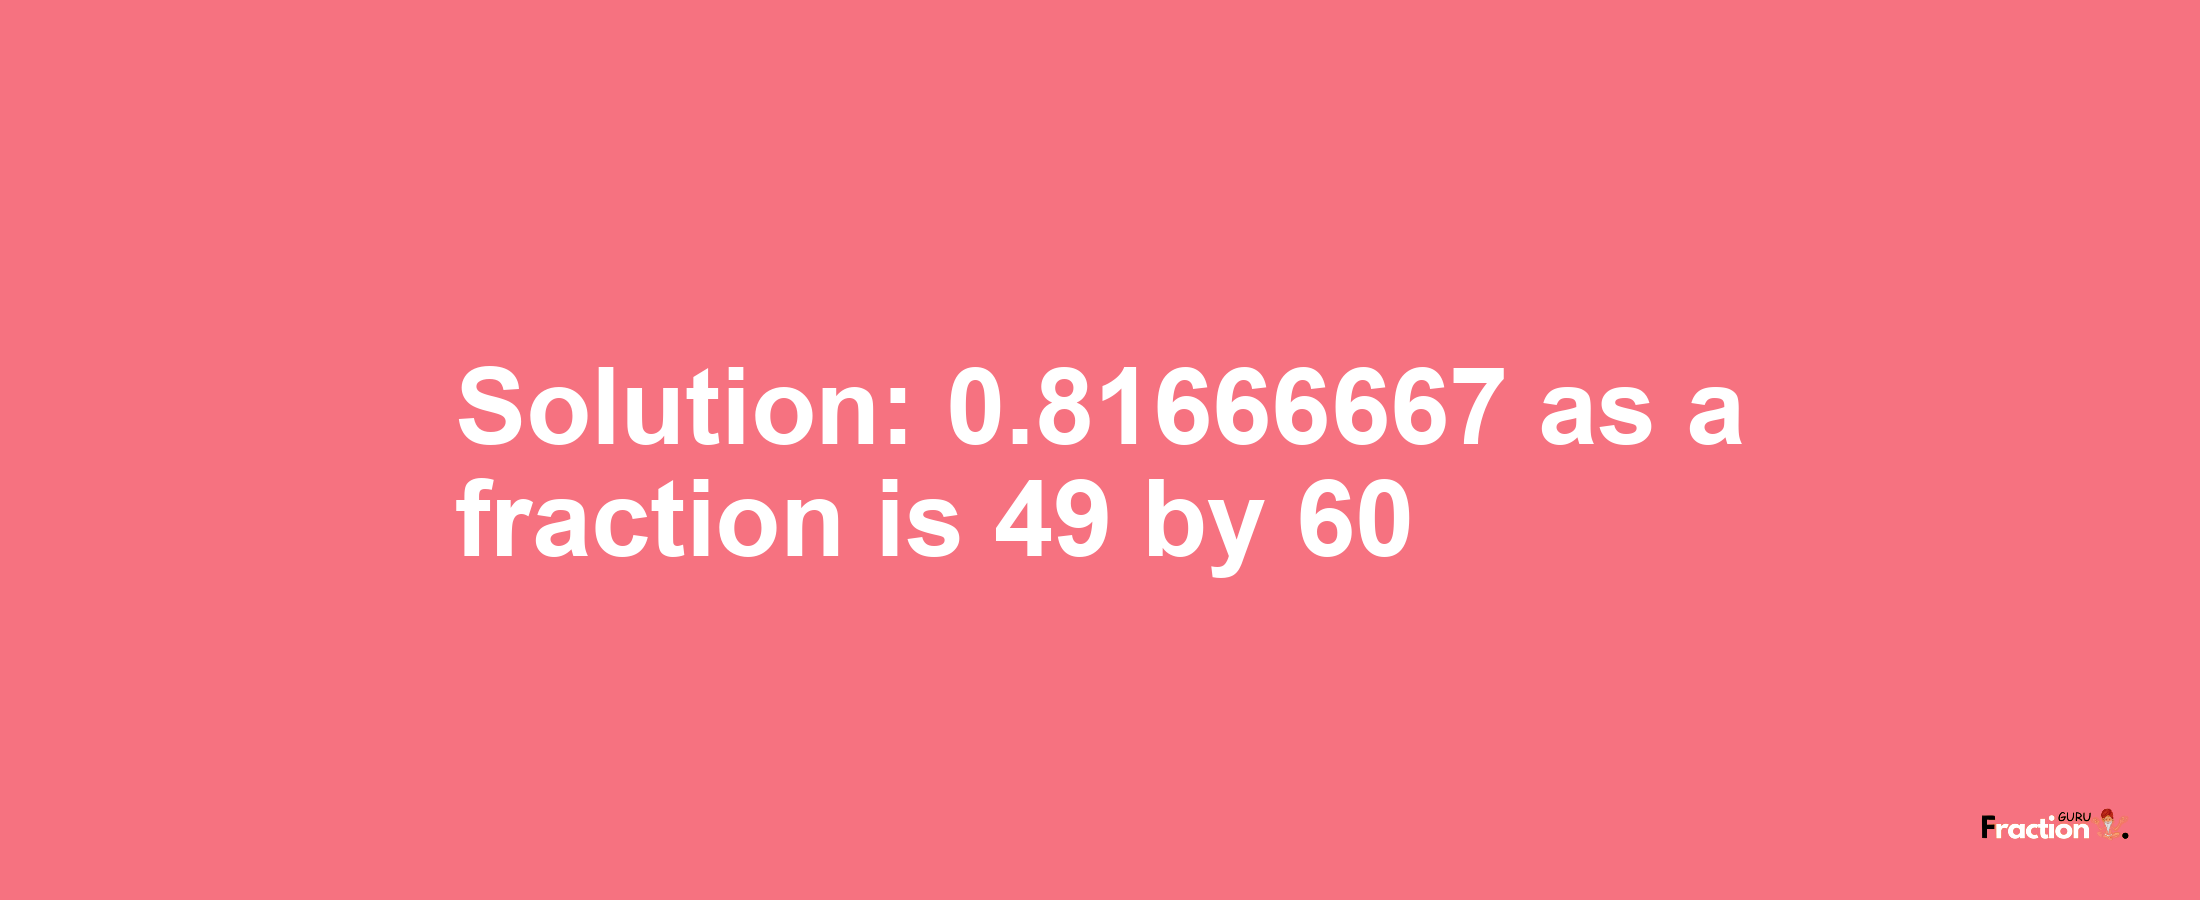 Solution:0.81666667 as a fraction is 49/60